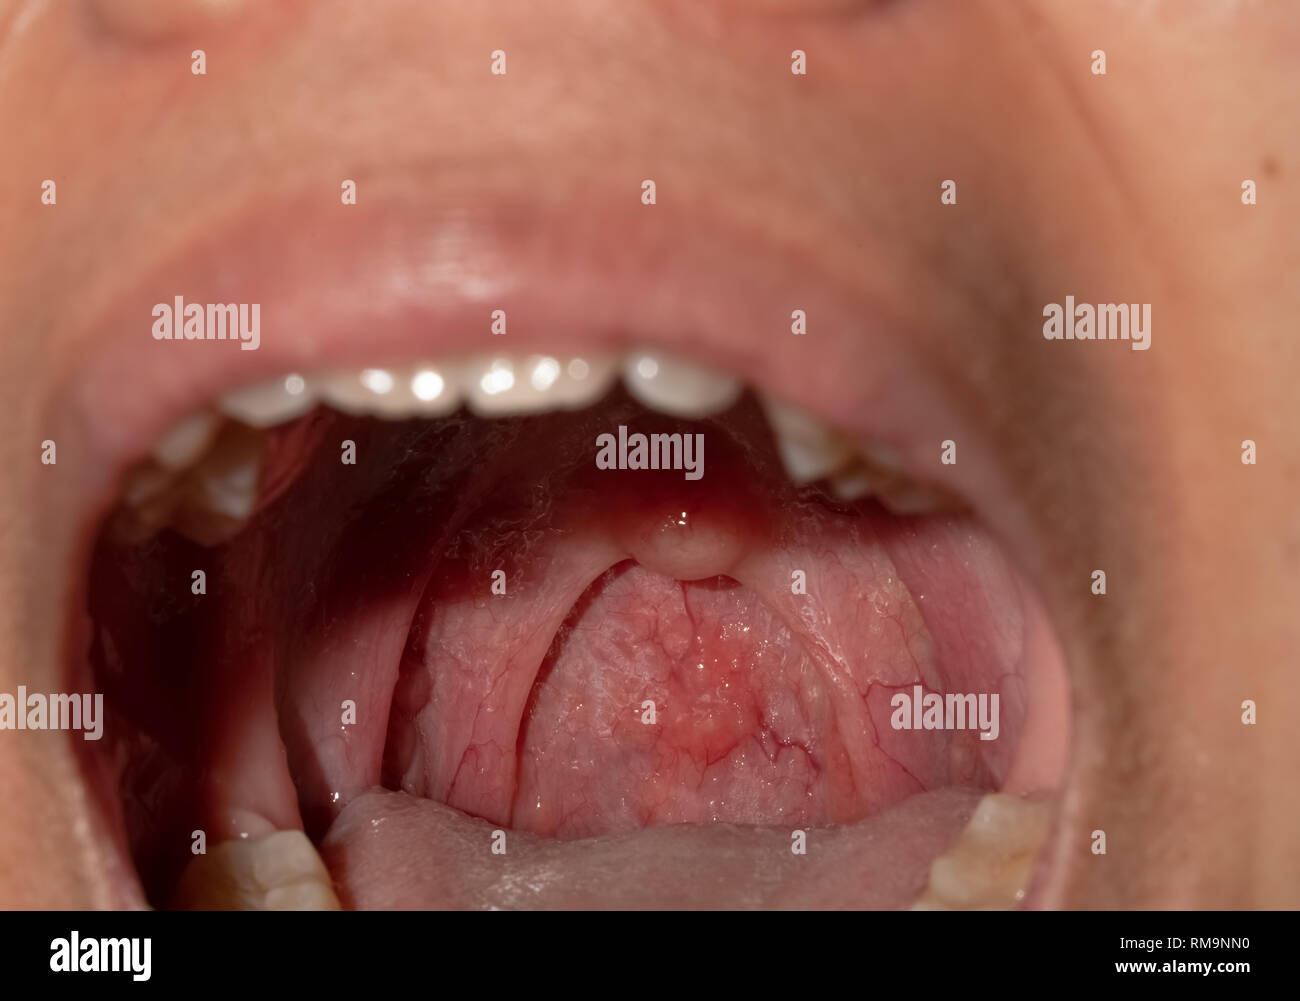 Sore throat with throat swollen. Closeup open mouth with posterior pharyngeal wall swelling and uvula and tonsil. Influenza follicles in the posterior Stock Photo